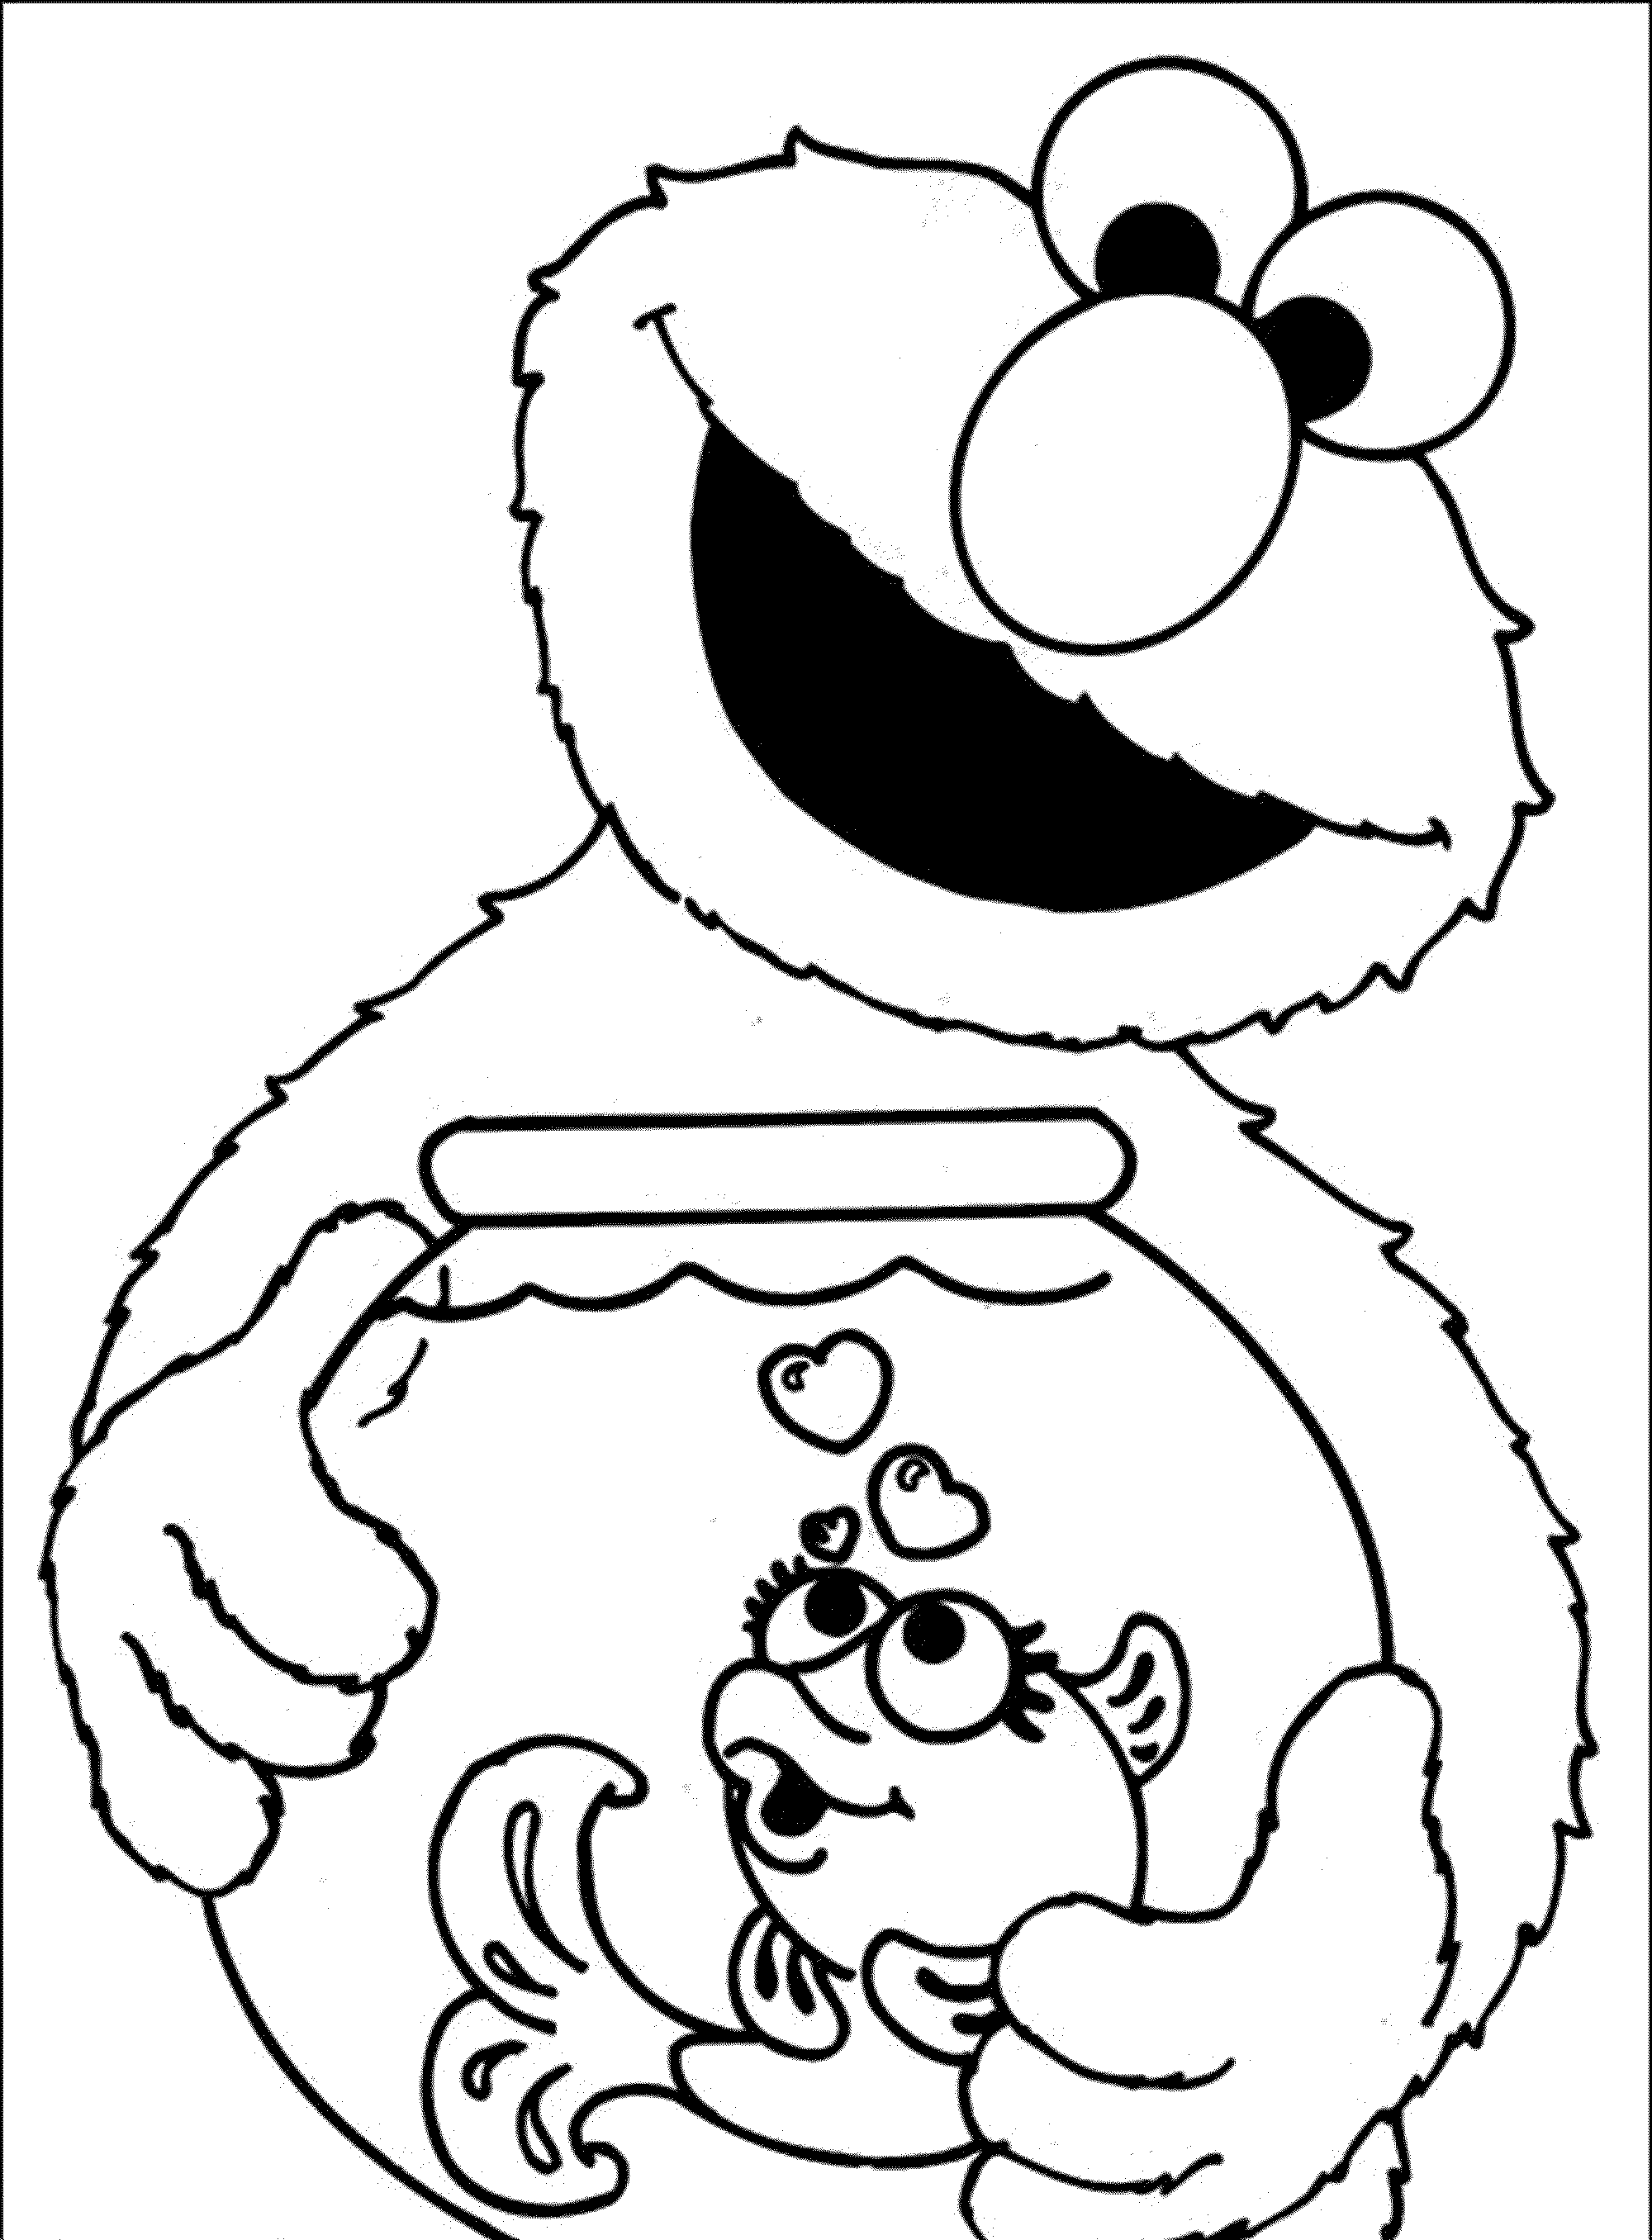 Print Download Elmo Coloring Pages for Children s Home Activity